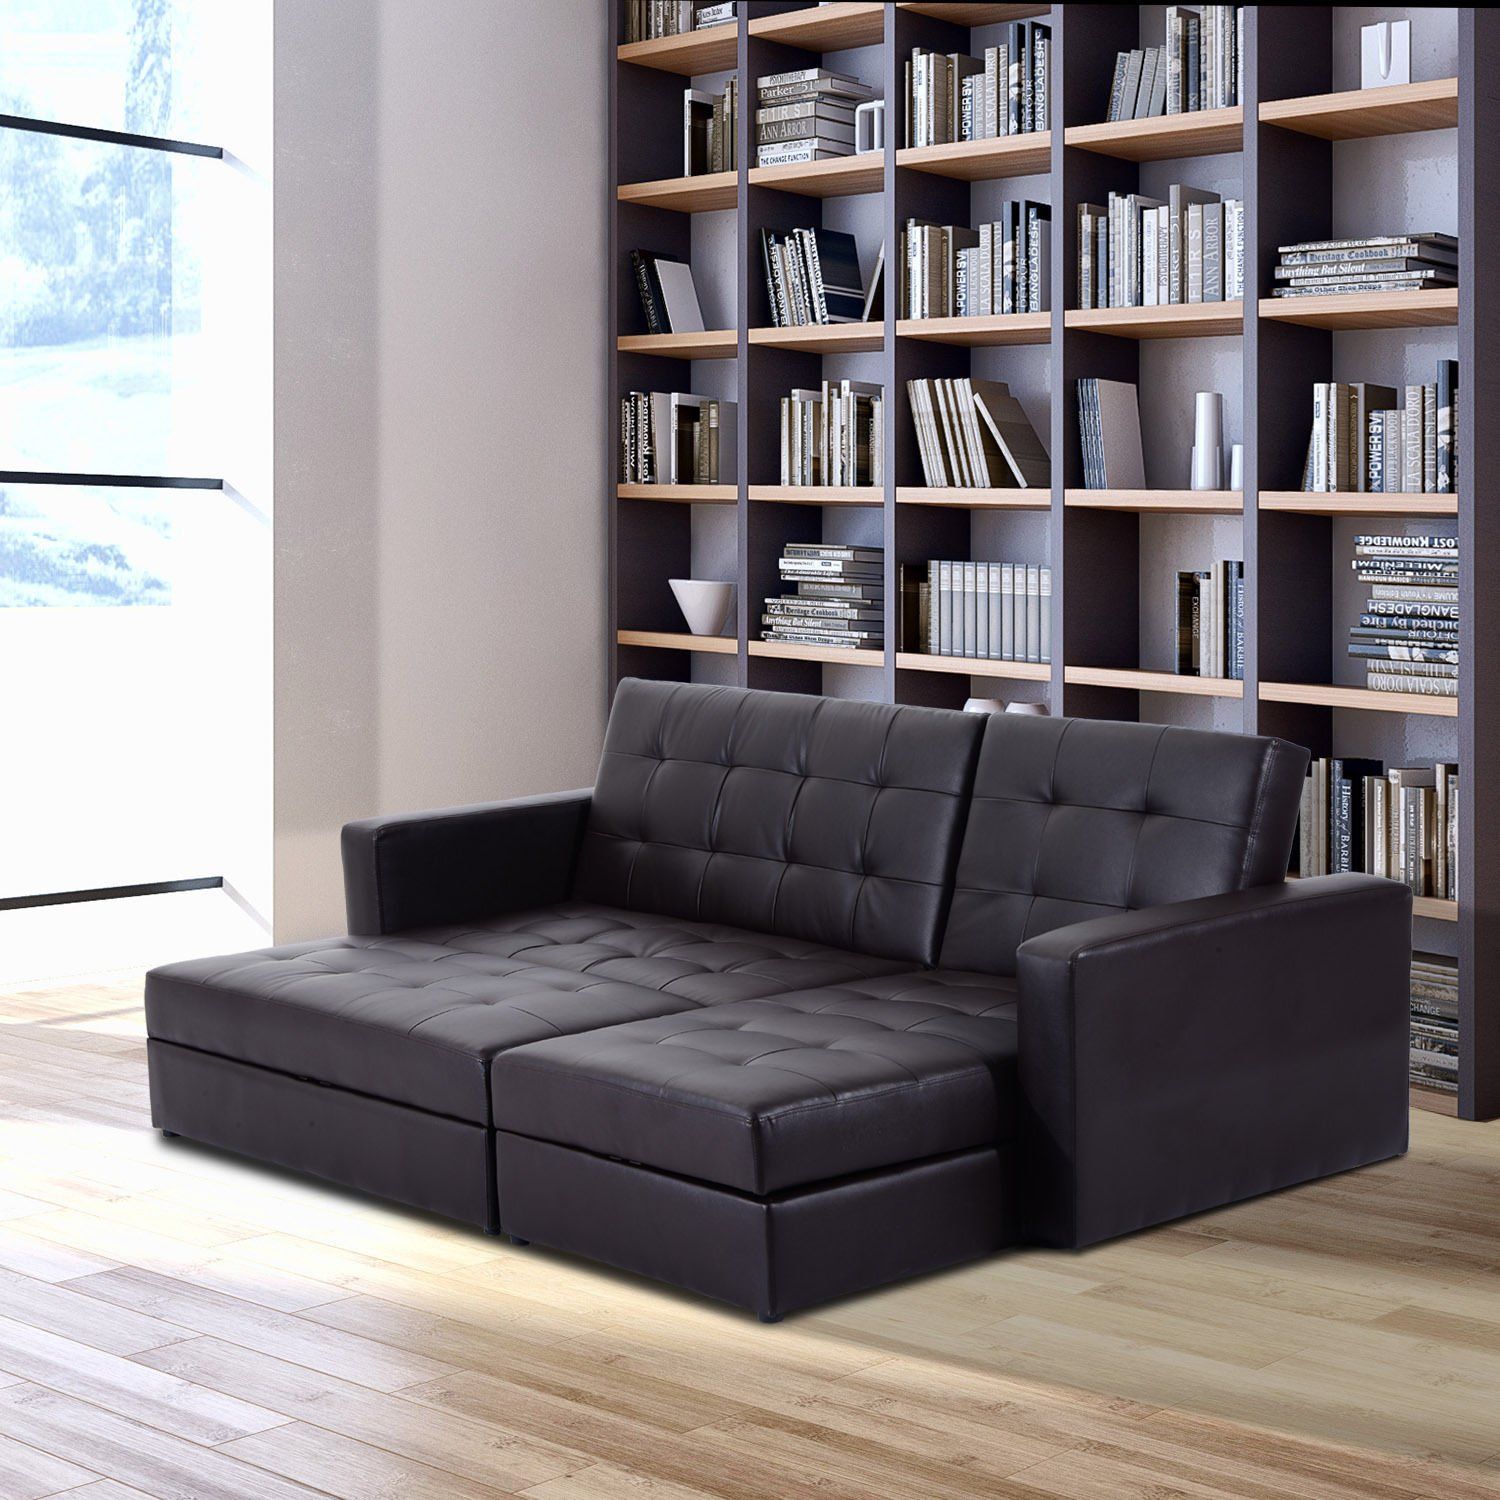 Storage+sleeper+couch+sofa+bed – Simply Style Intended For Liberty Sectional Futon Sofas With Storage (View 10 of 15)